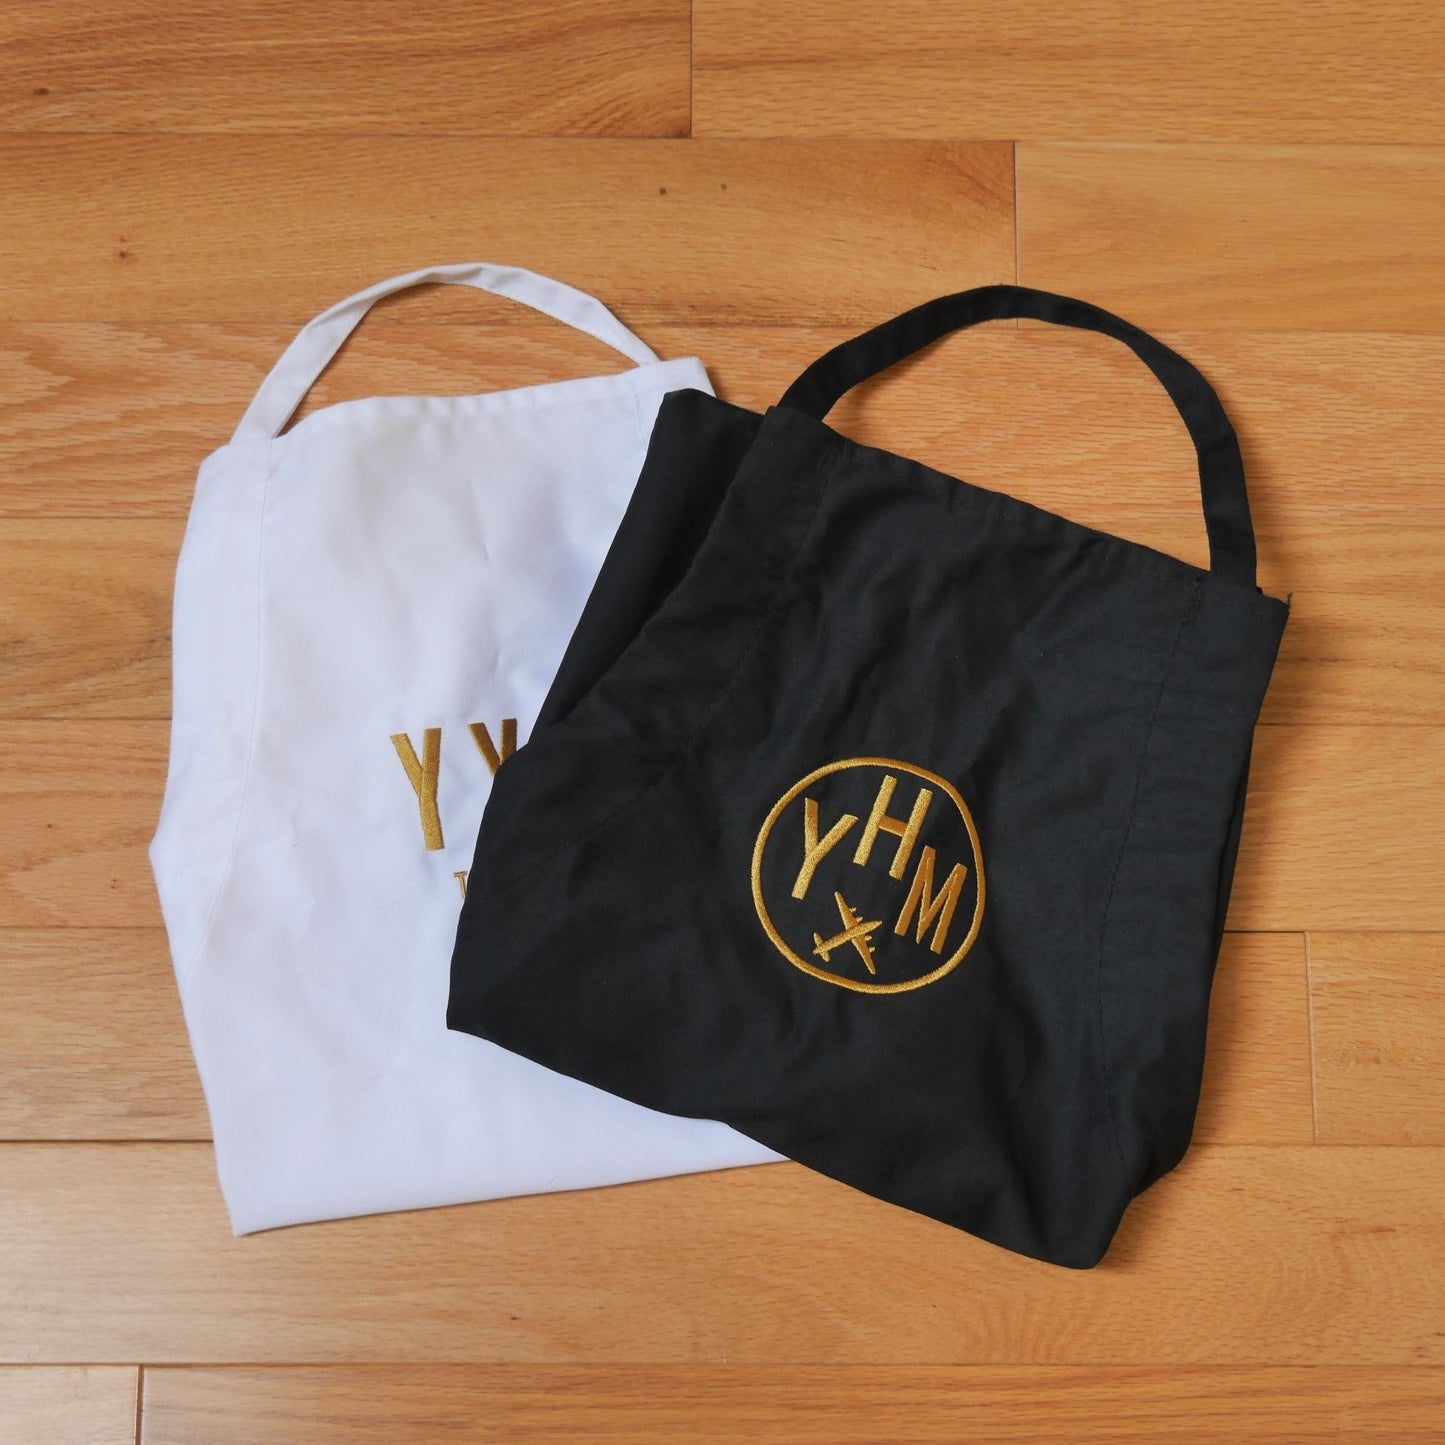 City Embroidered Apron - Old Gold • CHS Charleston • YHM Designs - Image 14